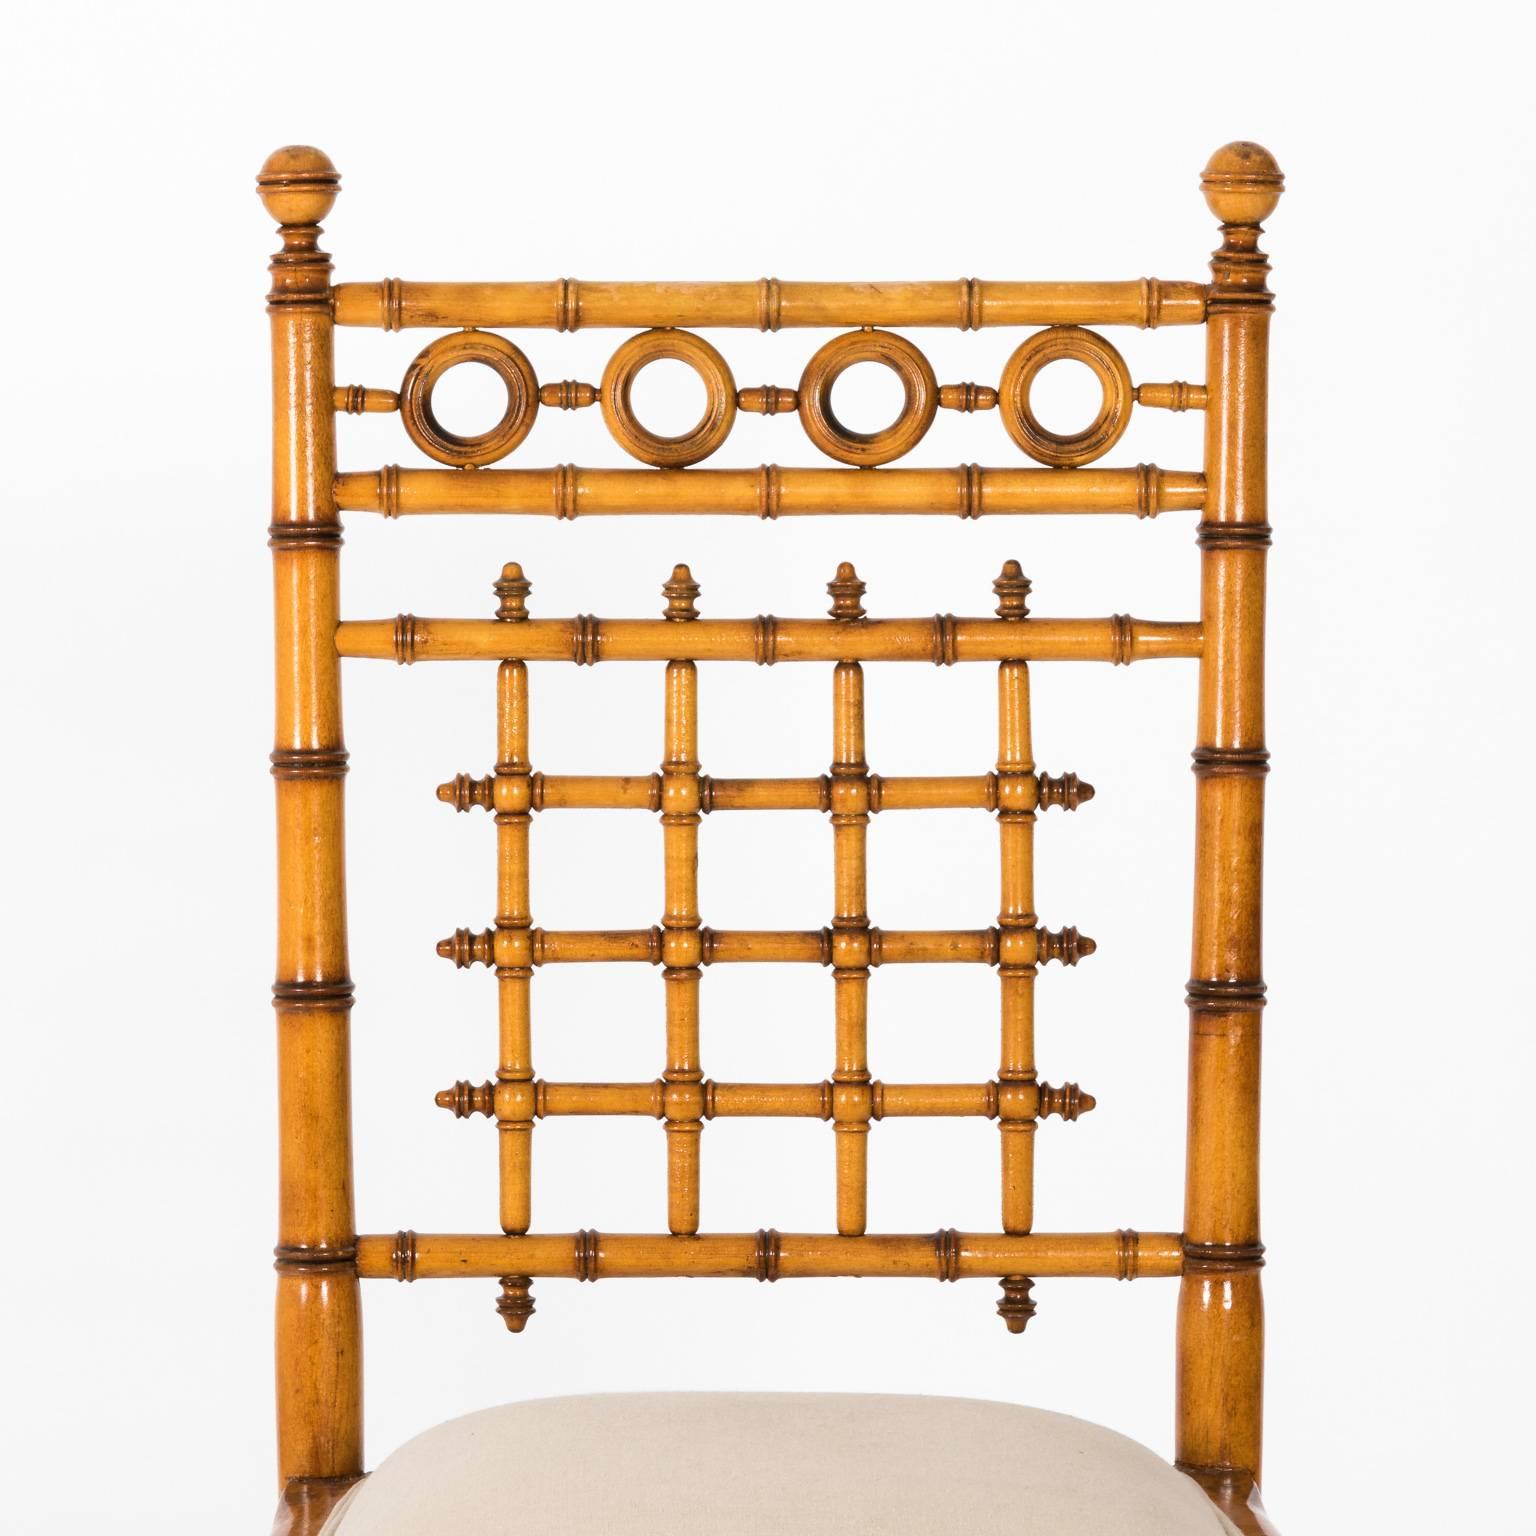 Chinoiserie Faux Bamboo Chair by Horner, circa 1880